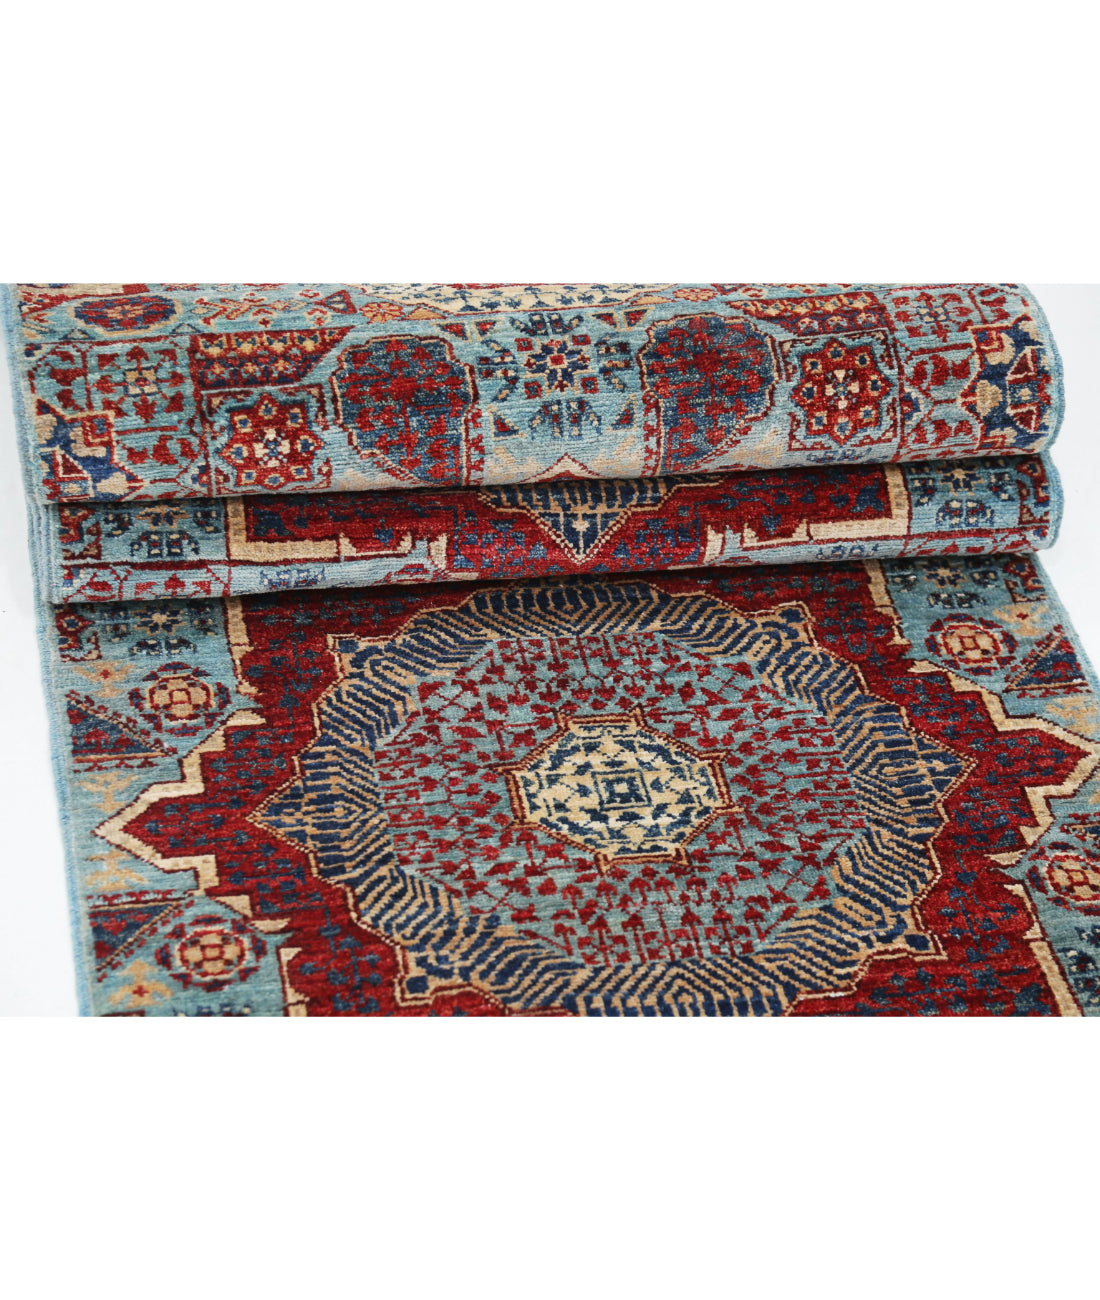 Hand Knotted Mamluk Wool Rug - 2'5'' x 13'6'' 2'5'' x 13'6'' (73 X 405) / Blue / Red